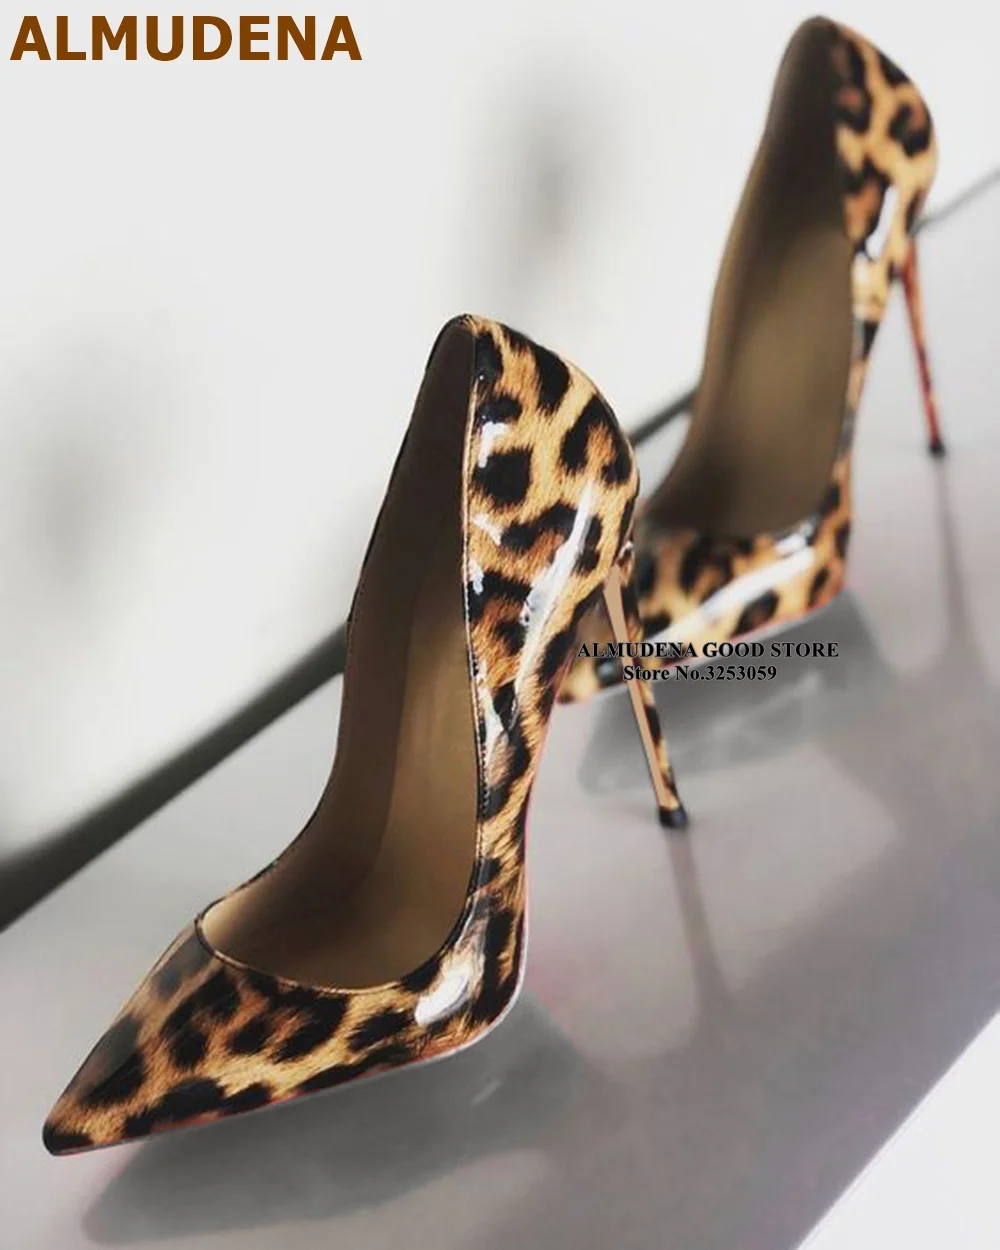 

ALMUDENA Luxurious Brand Thin High Heel Pumps Leopard Printed Pointed Toe Party Shoes Wedding Shoes Dropship Pumps 12cm 10cm 8cm